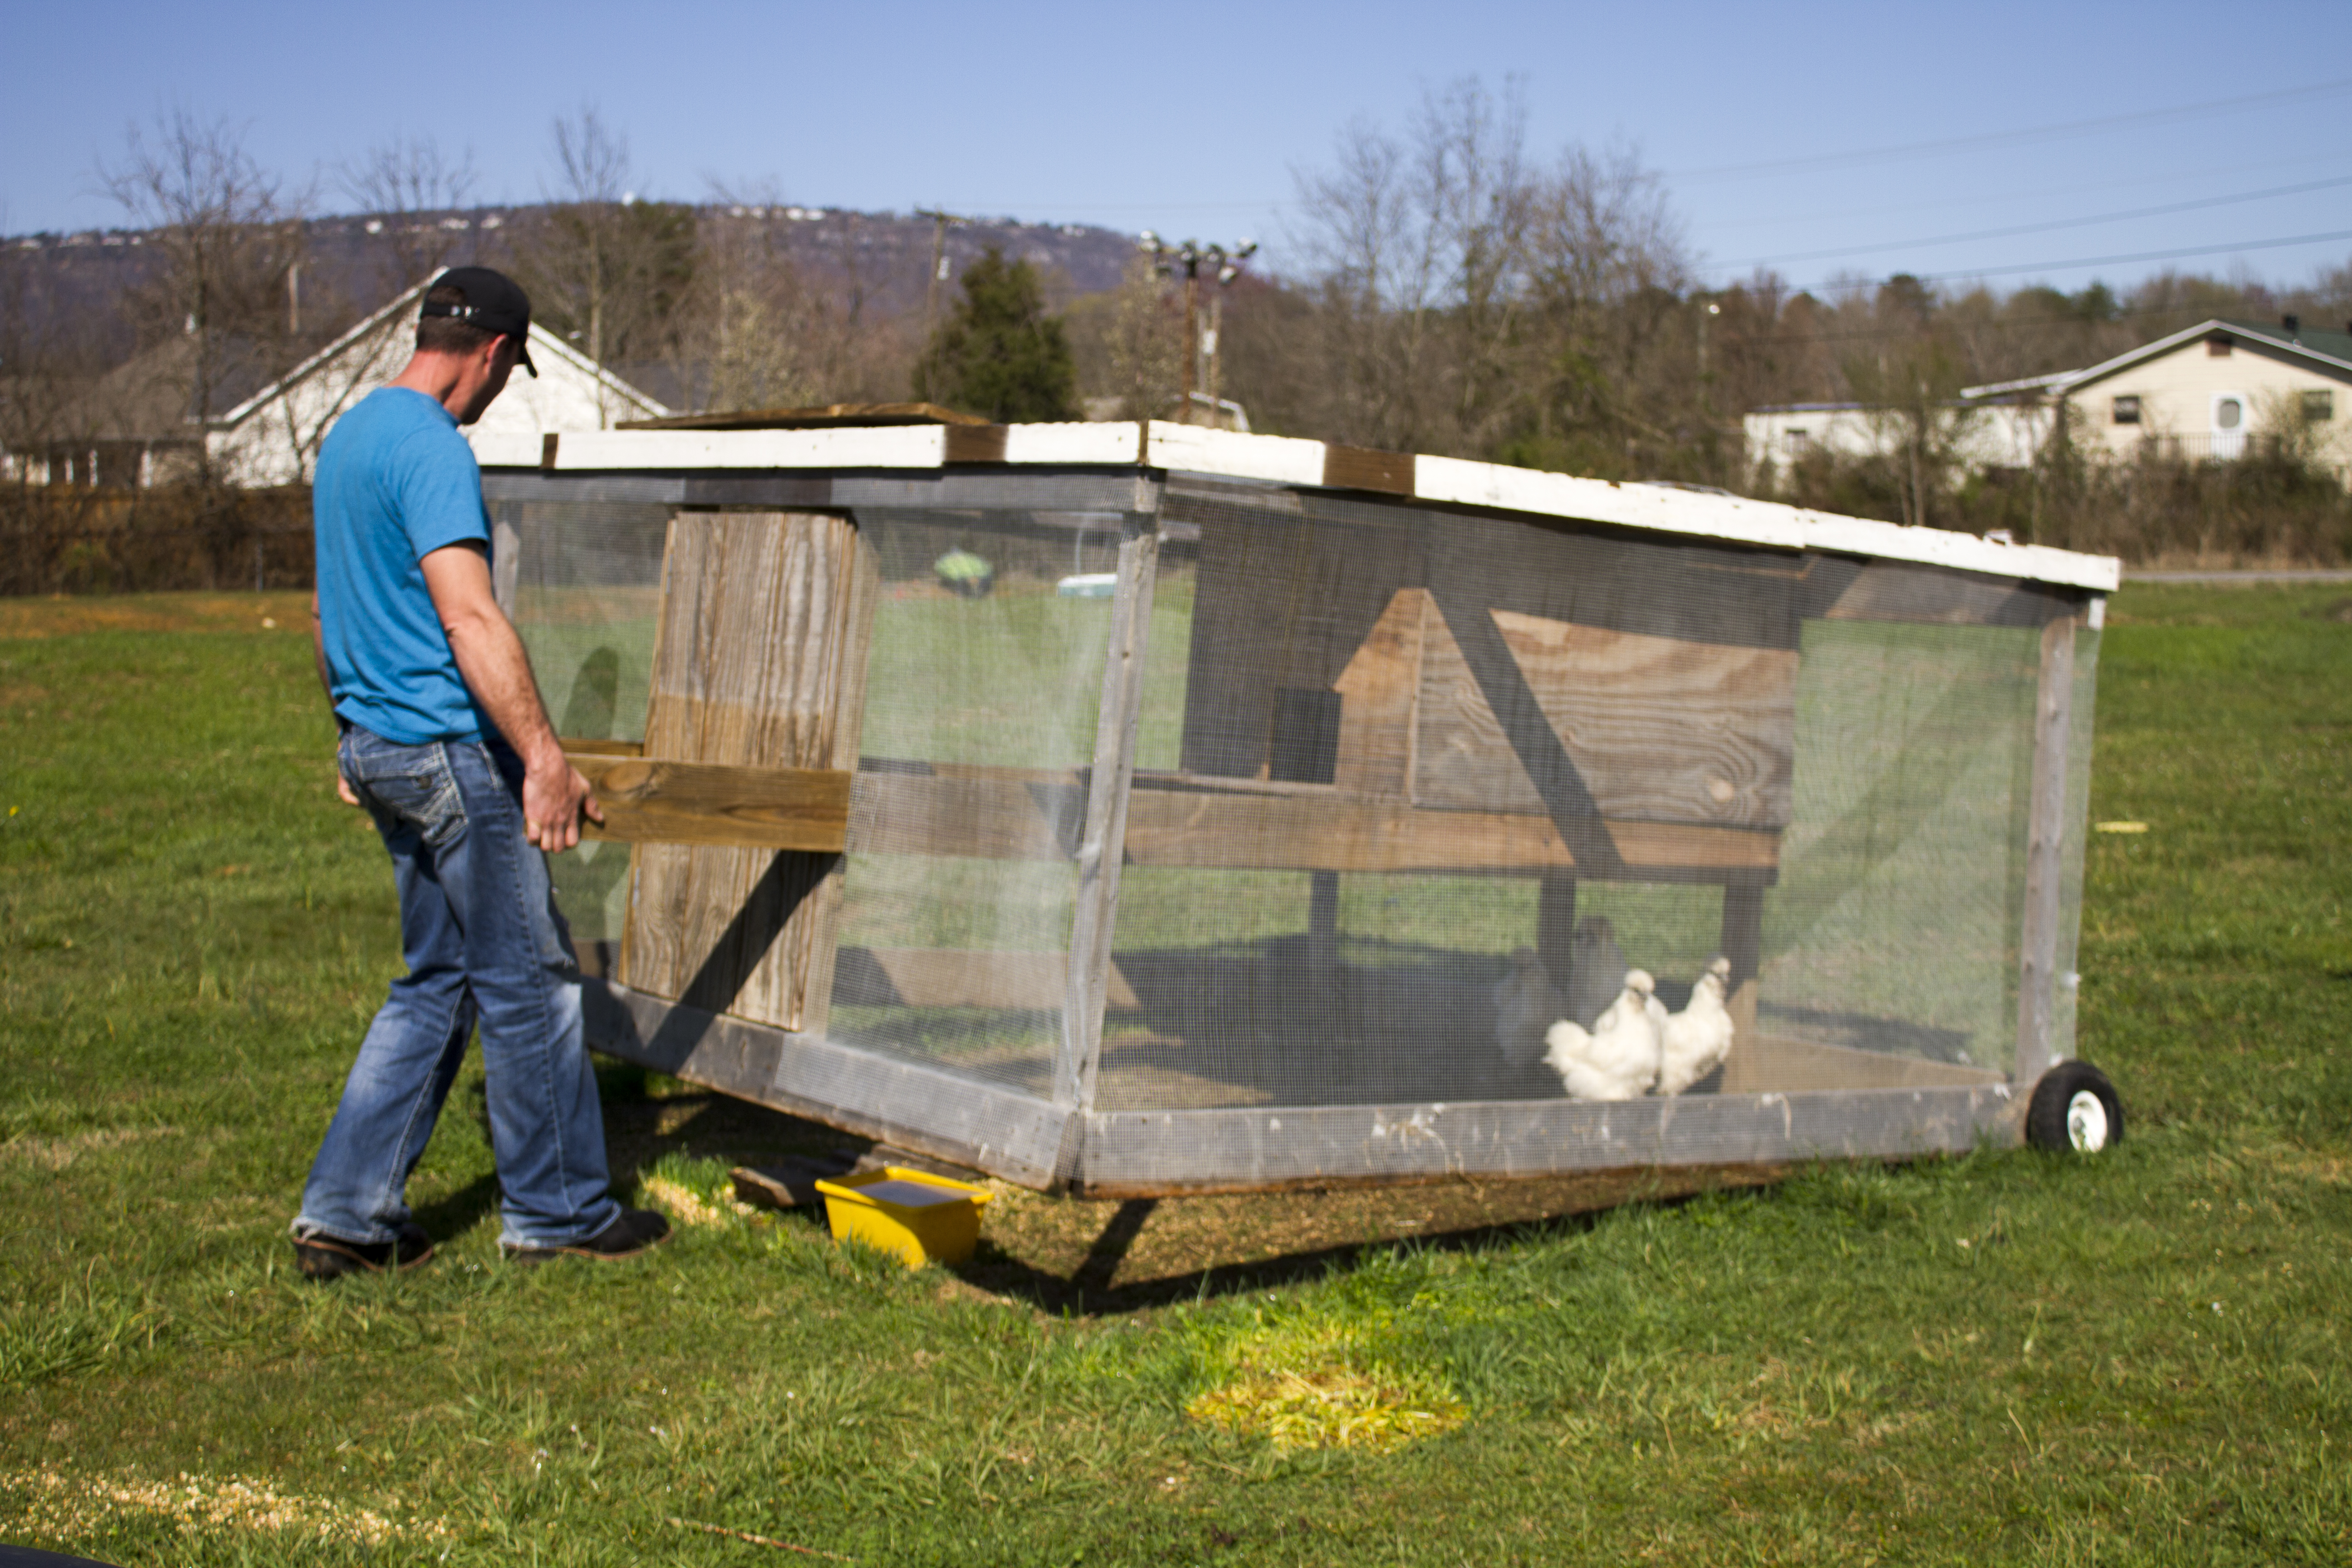 Chinese White Silkies and Chicken Tractors | HATponics